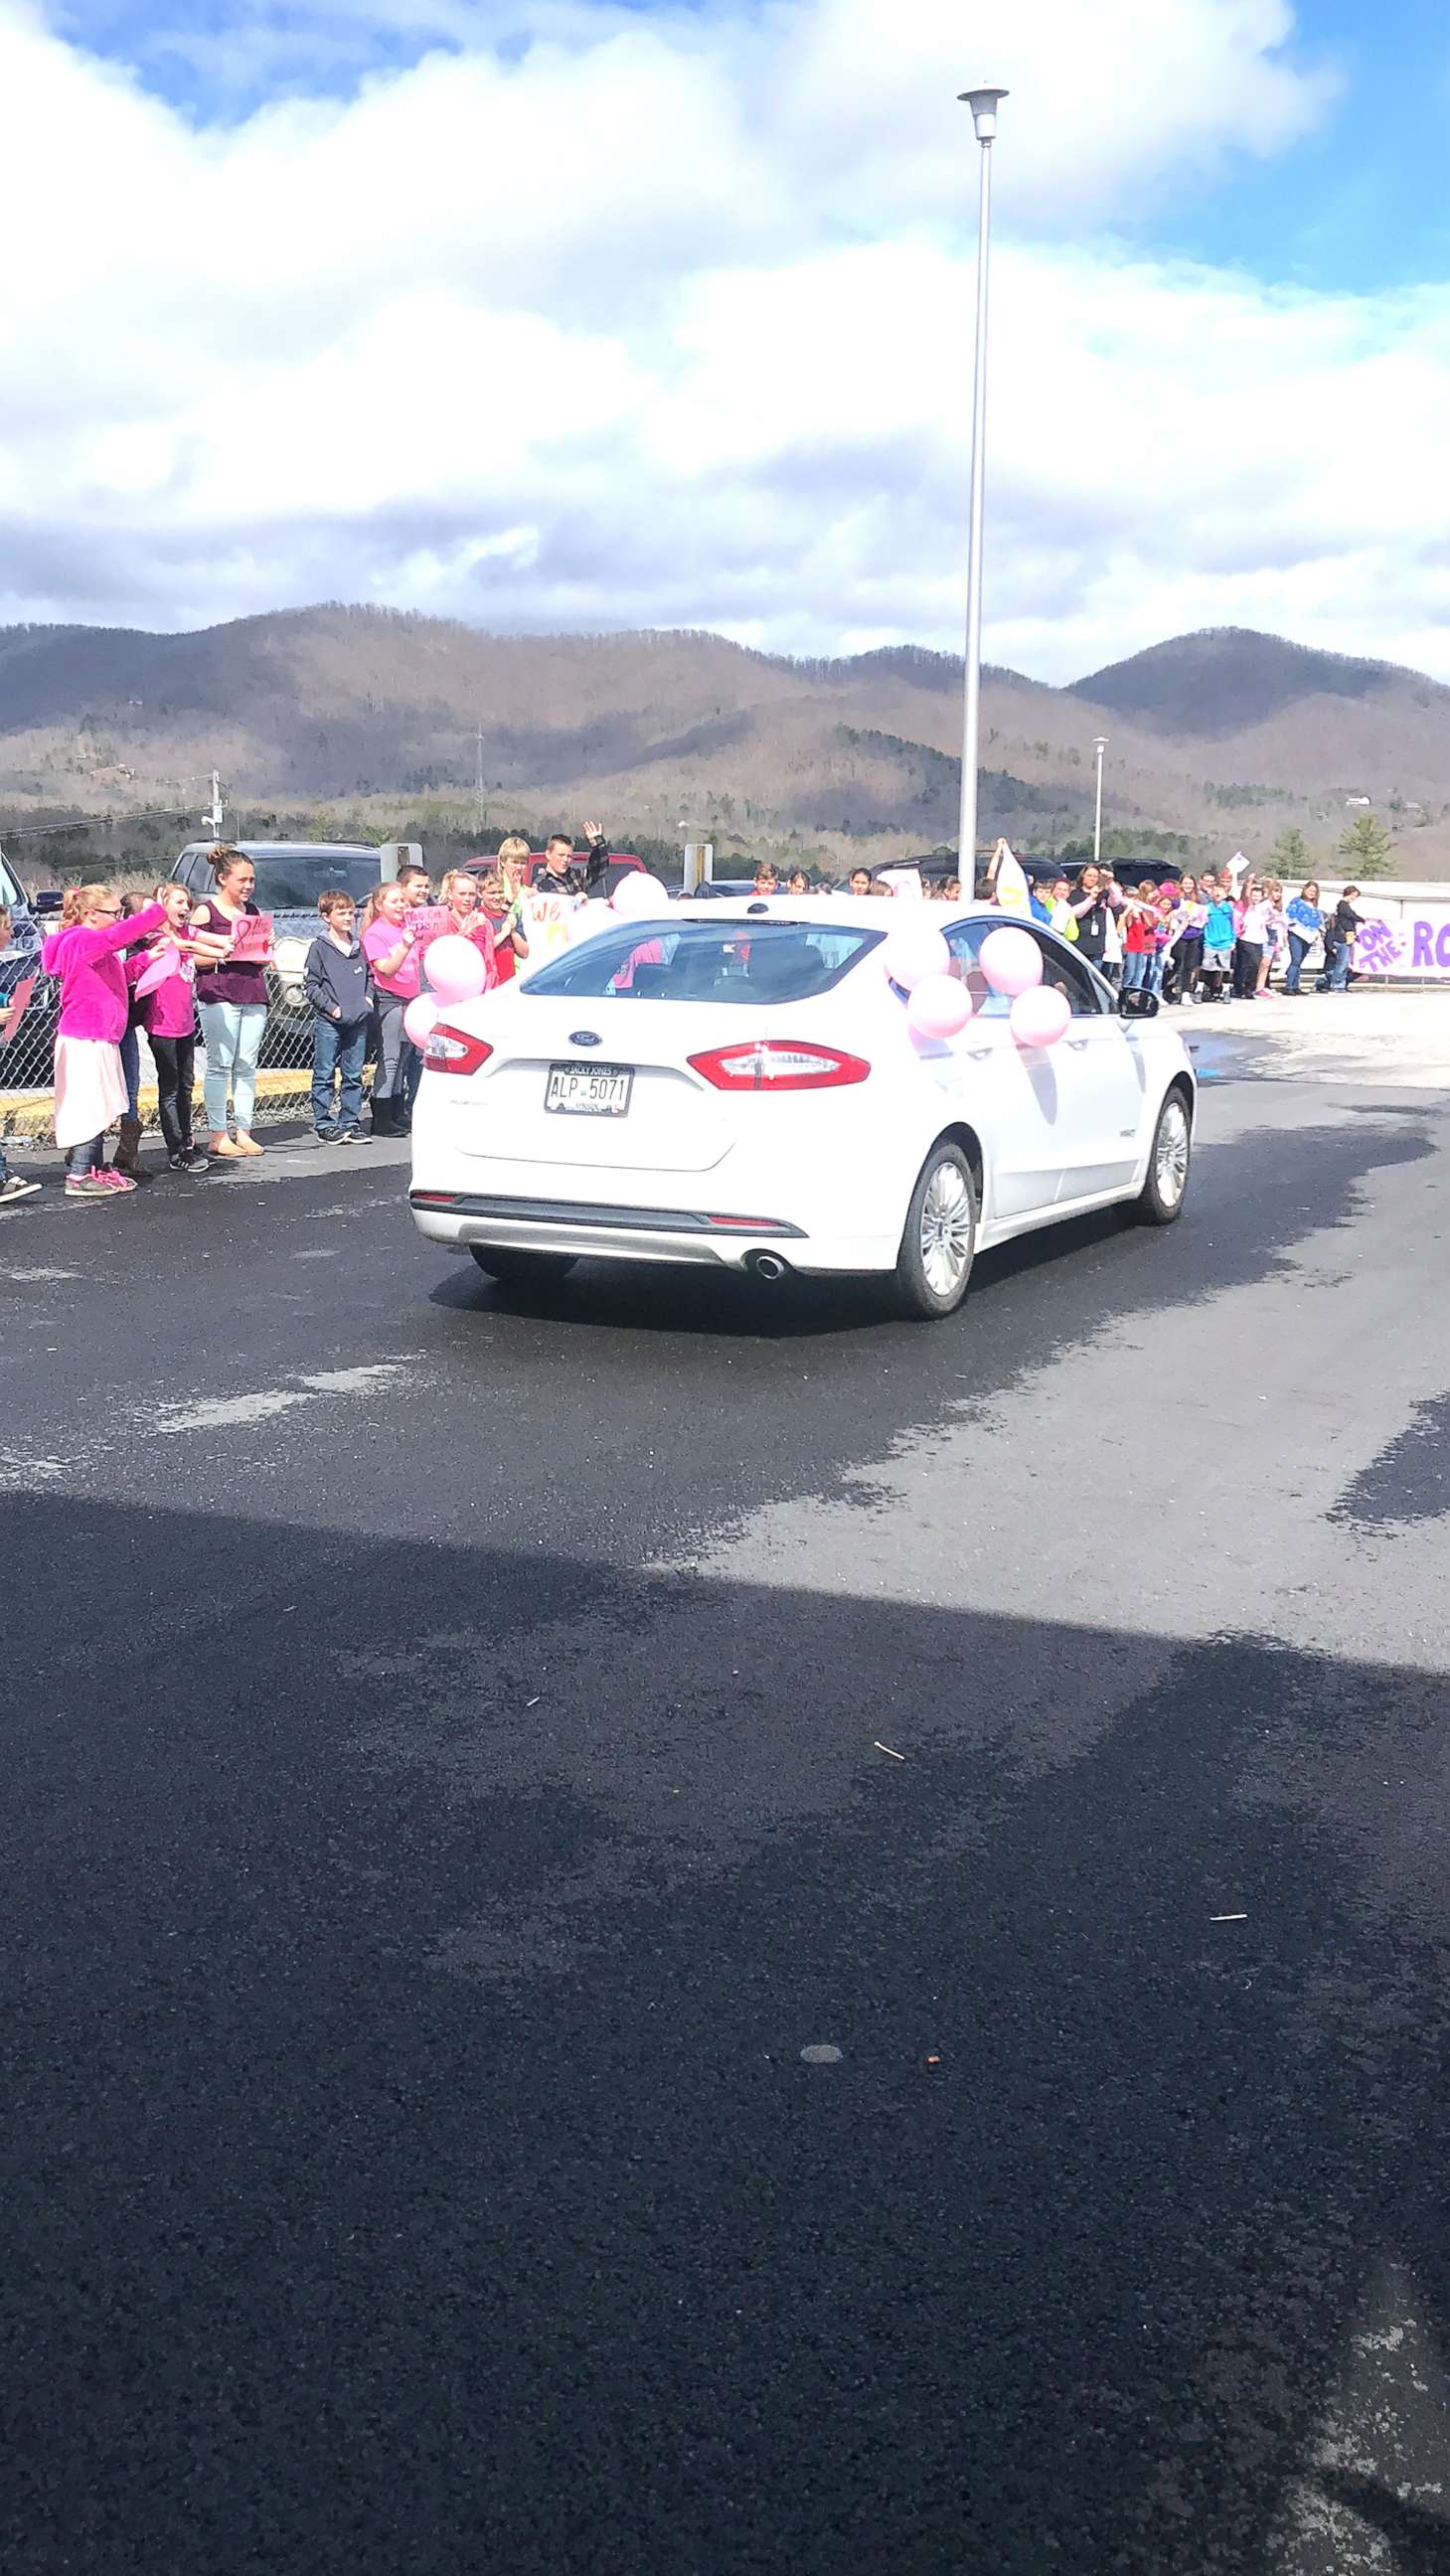 PHOTO: On Monday, students and staff at Union County Elementary School in Georgia, gathered to cheer on principal Patricia Cook as she went to her final treatment for breast cancer.